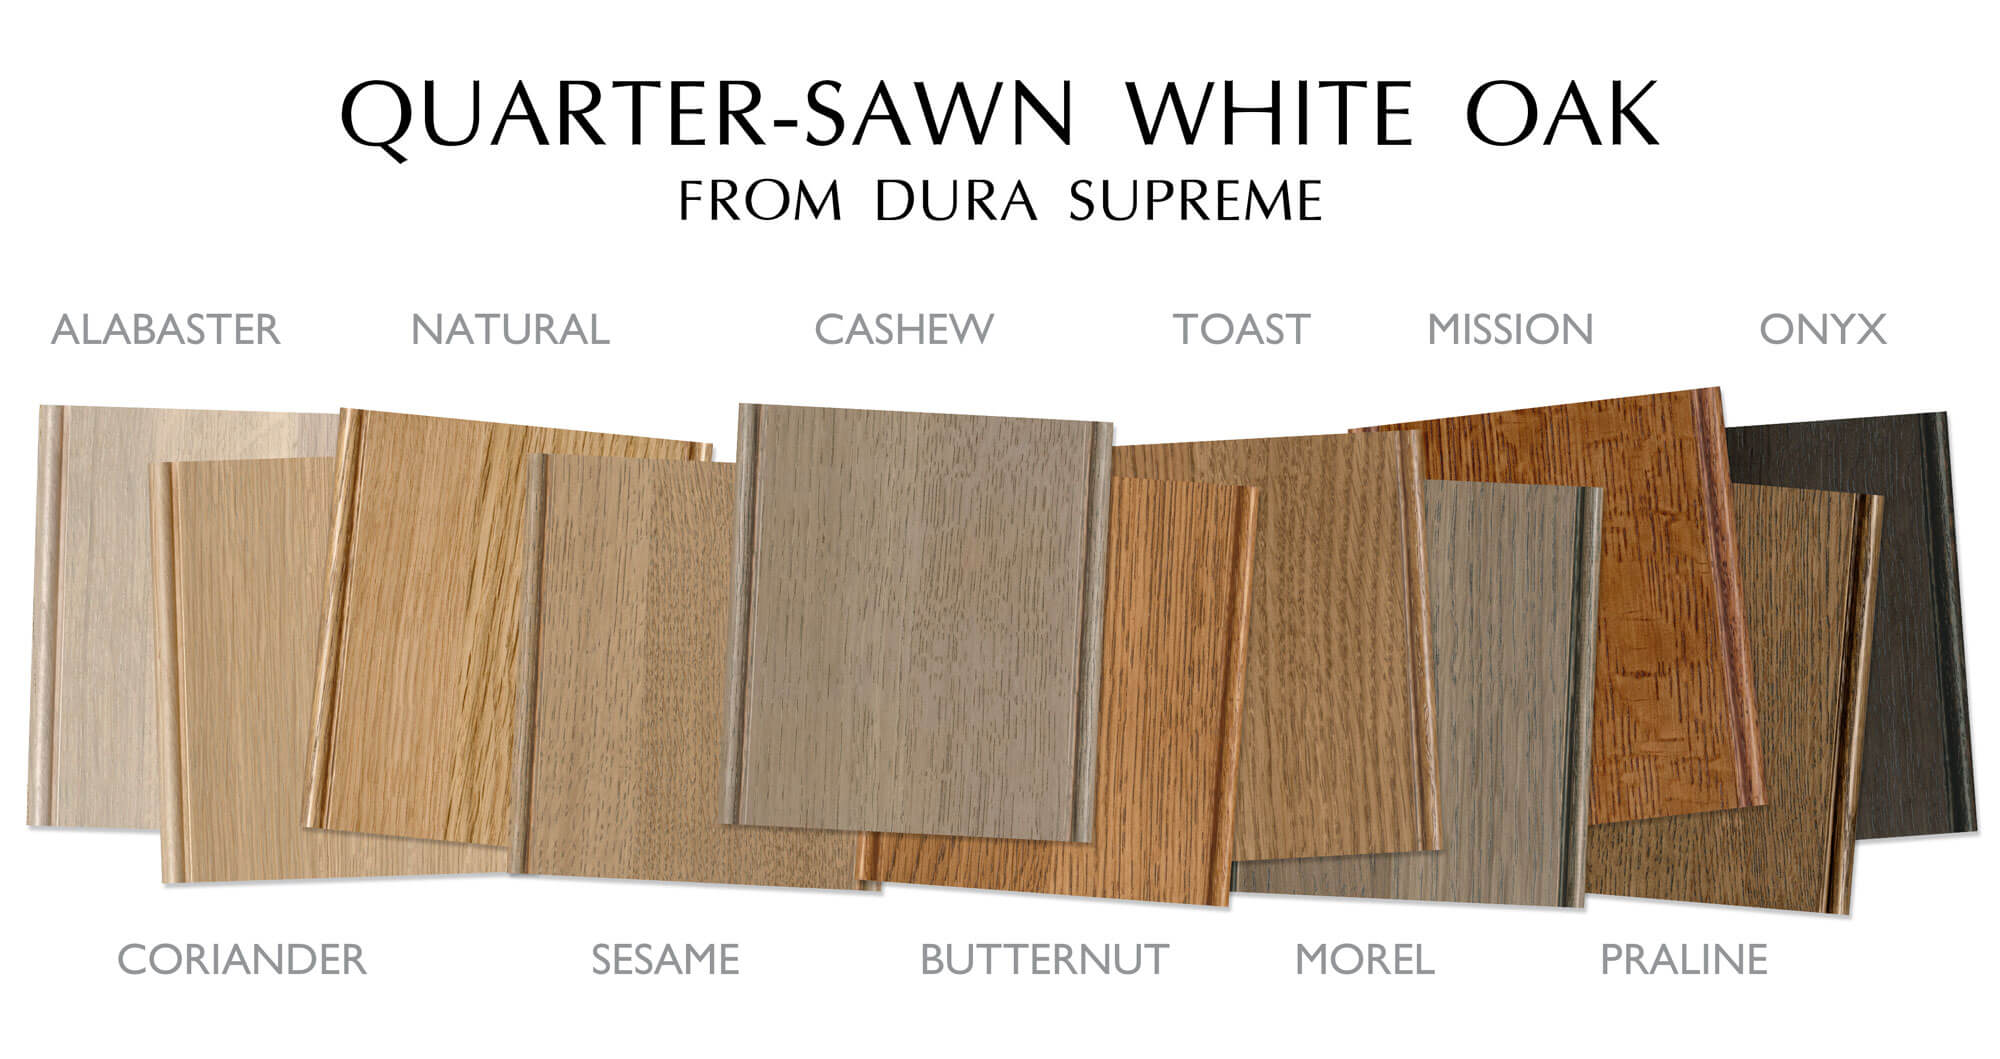 Several samples of Quarter-Sawn White Oak stained finishes from light to dark by Dura Supreme Cabinetry.